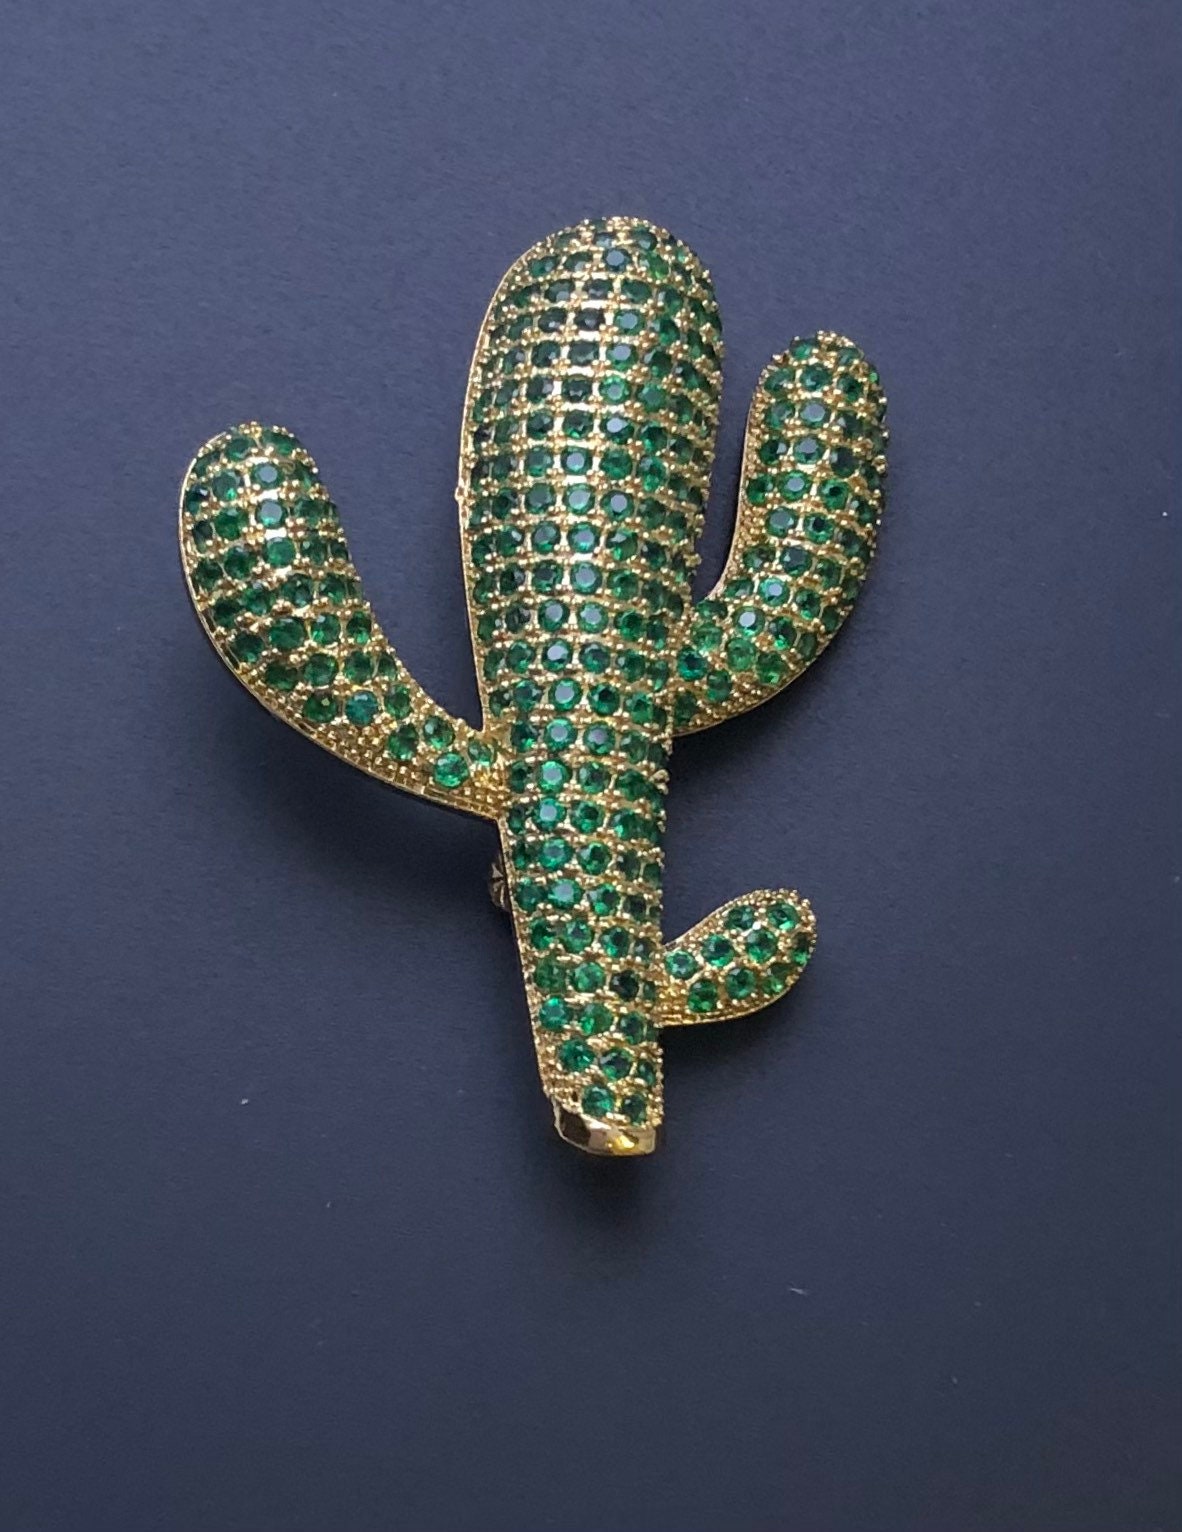 Brooches Pin For Women Men Kids Plant Green Cactus Funny Metal Enamel Pins  Fashion Jewlery Birthday Gift Wholesale From Linry198900, $0.62